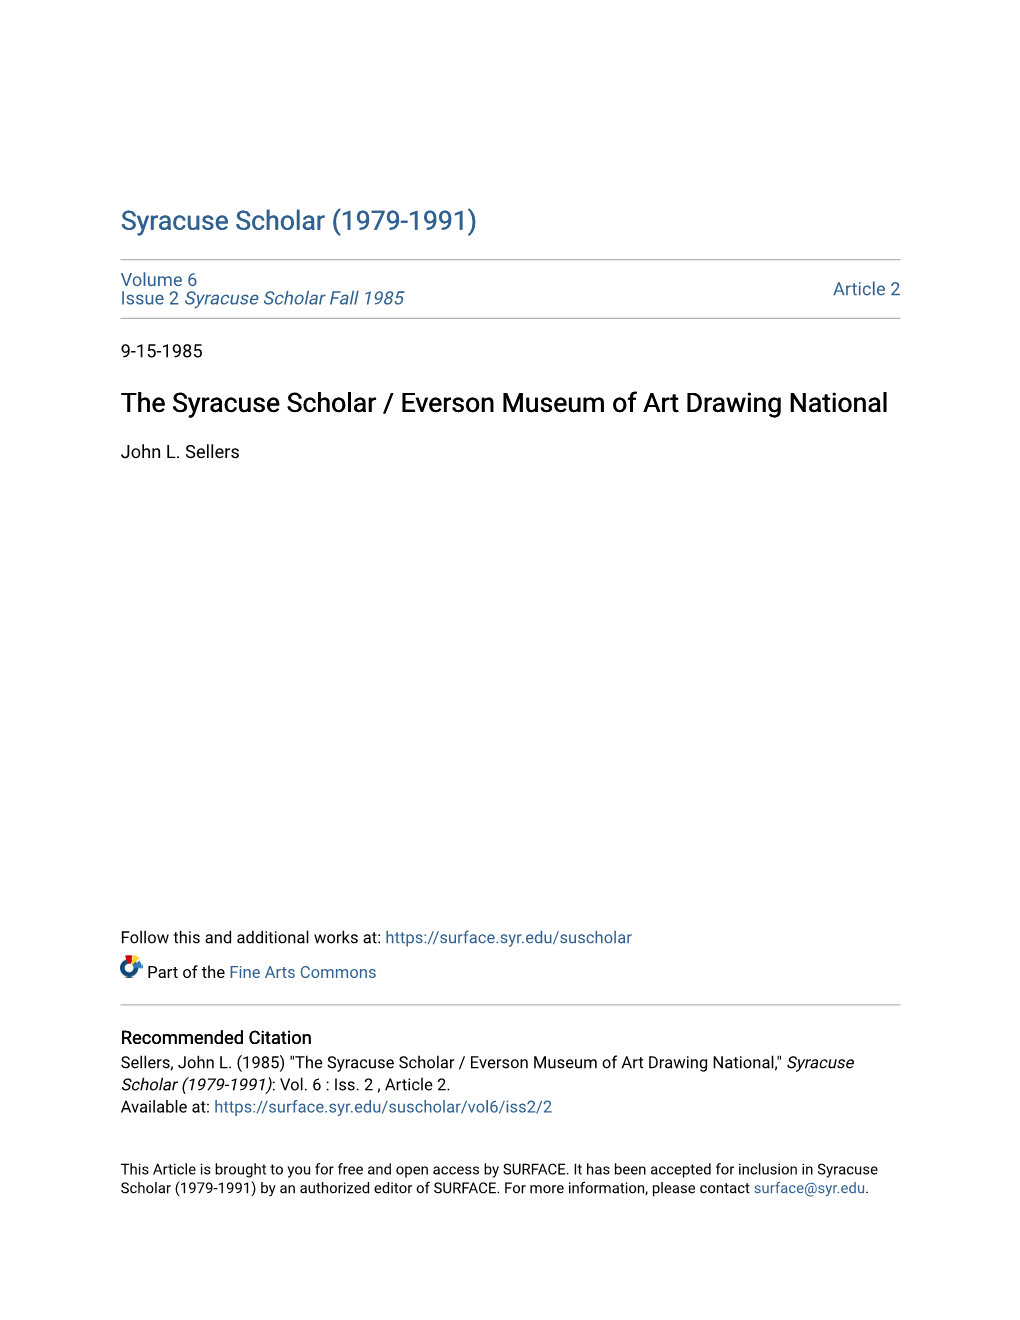 The Syracuse Scholar / Everson Museum of Art Drawing National